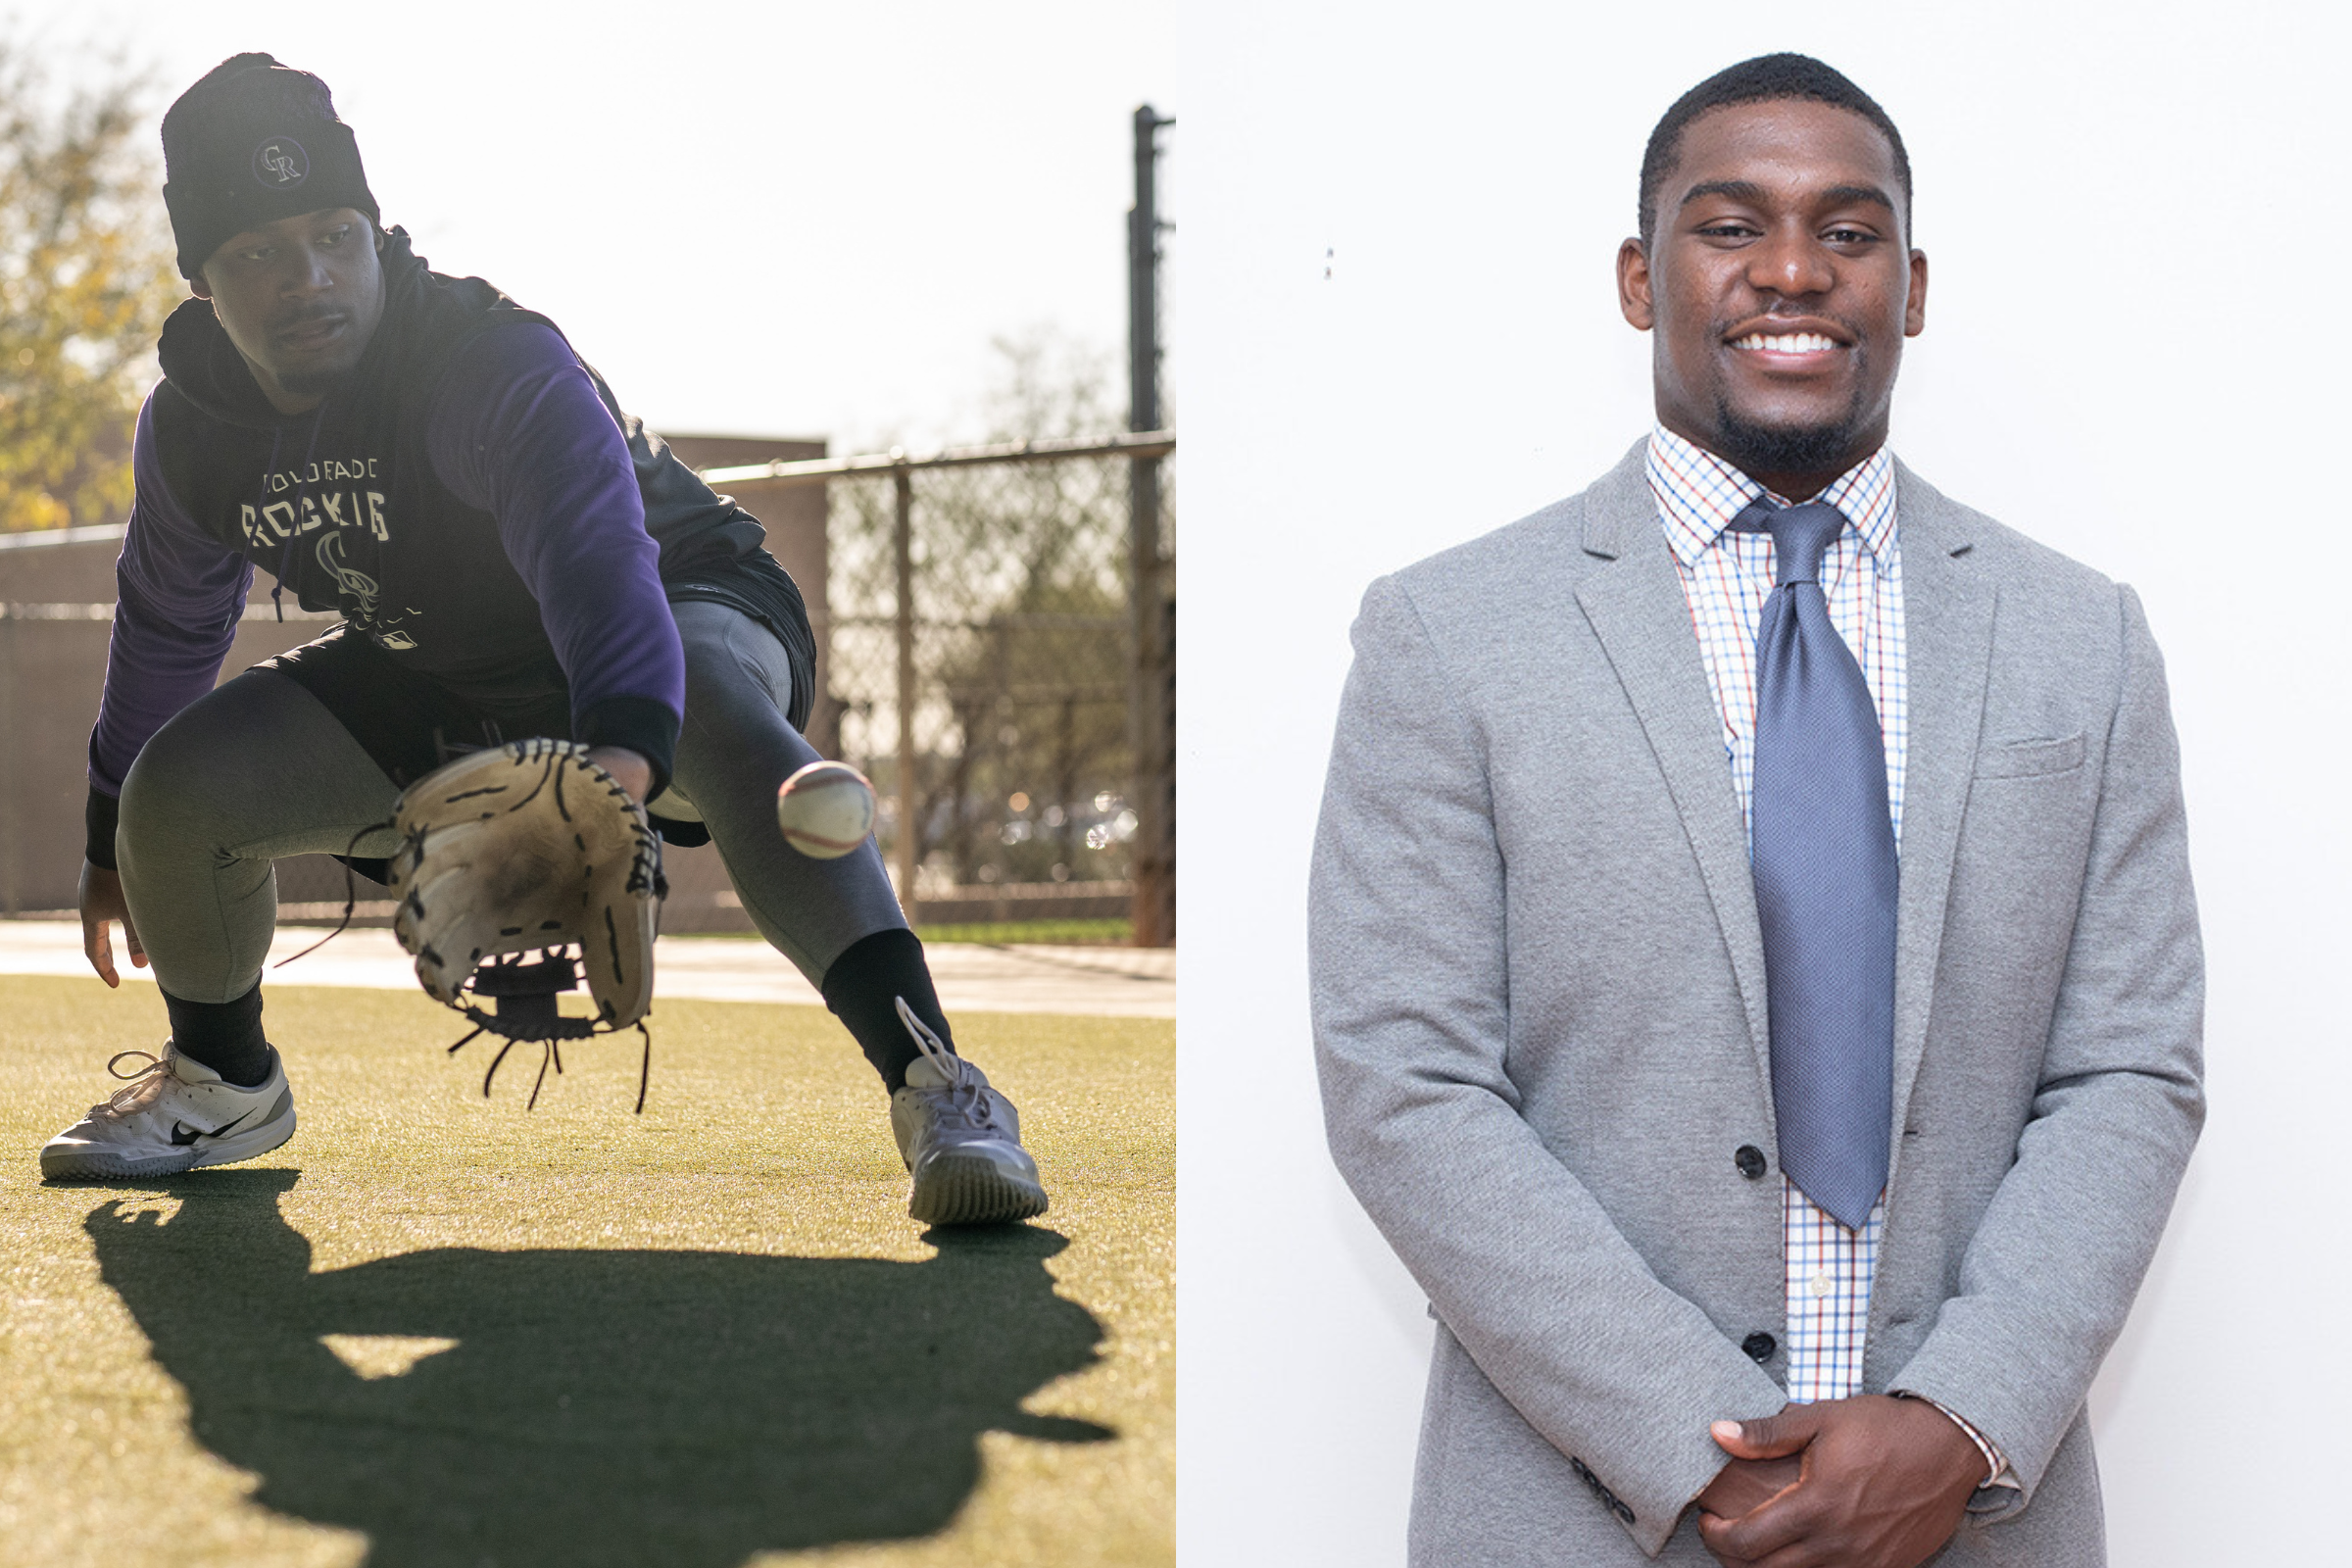 Two pictures of AJ Lewis, playing baseball and a portrait